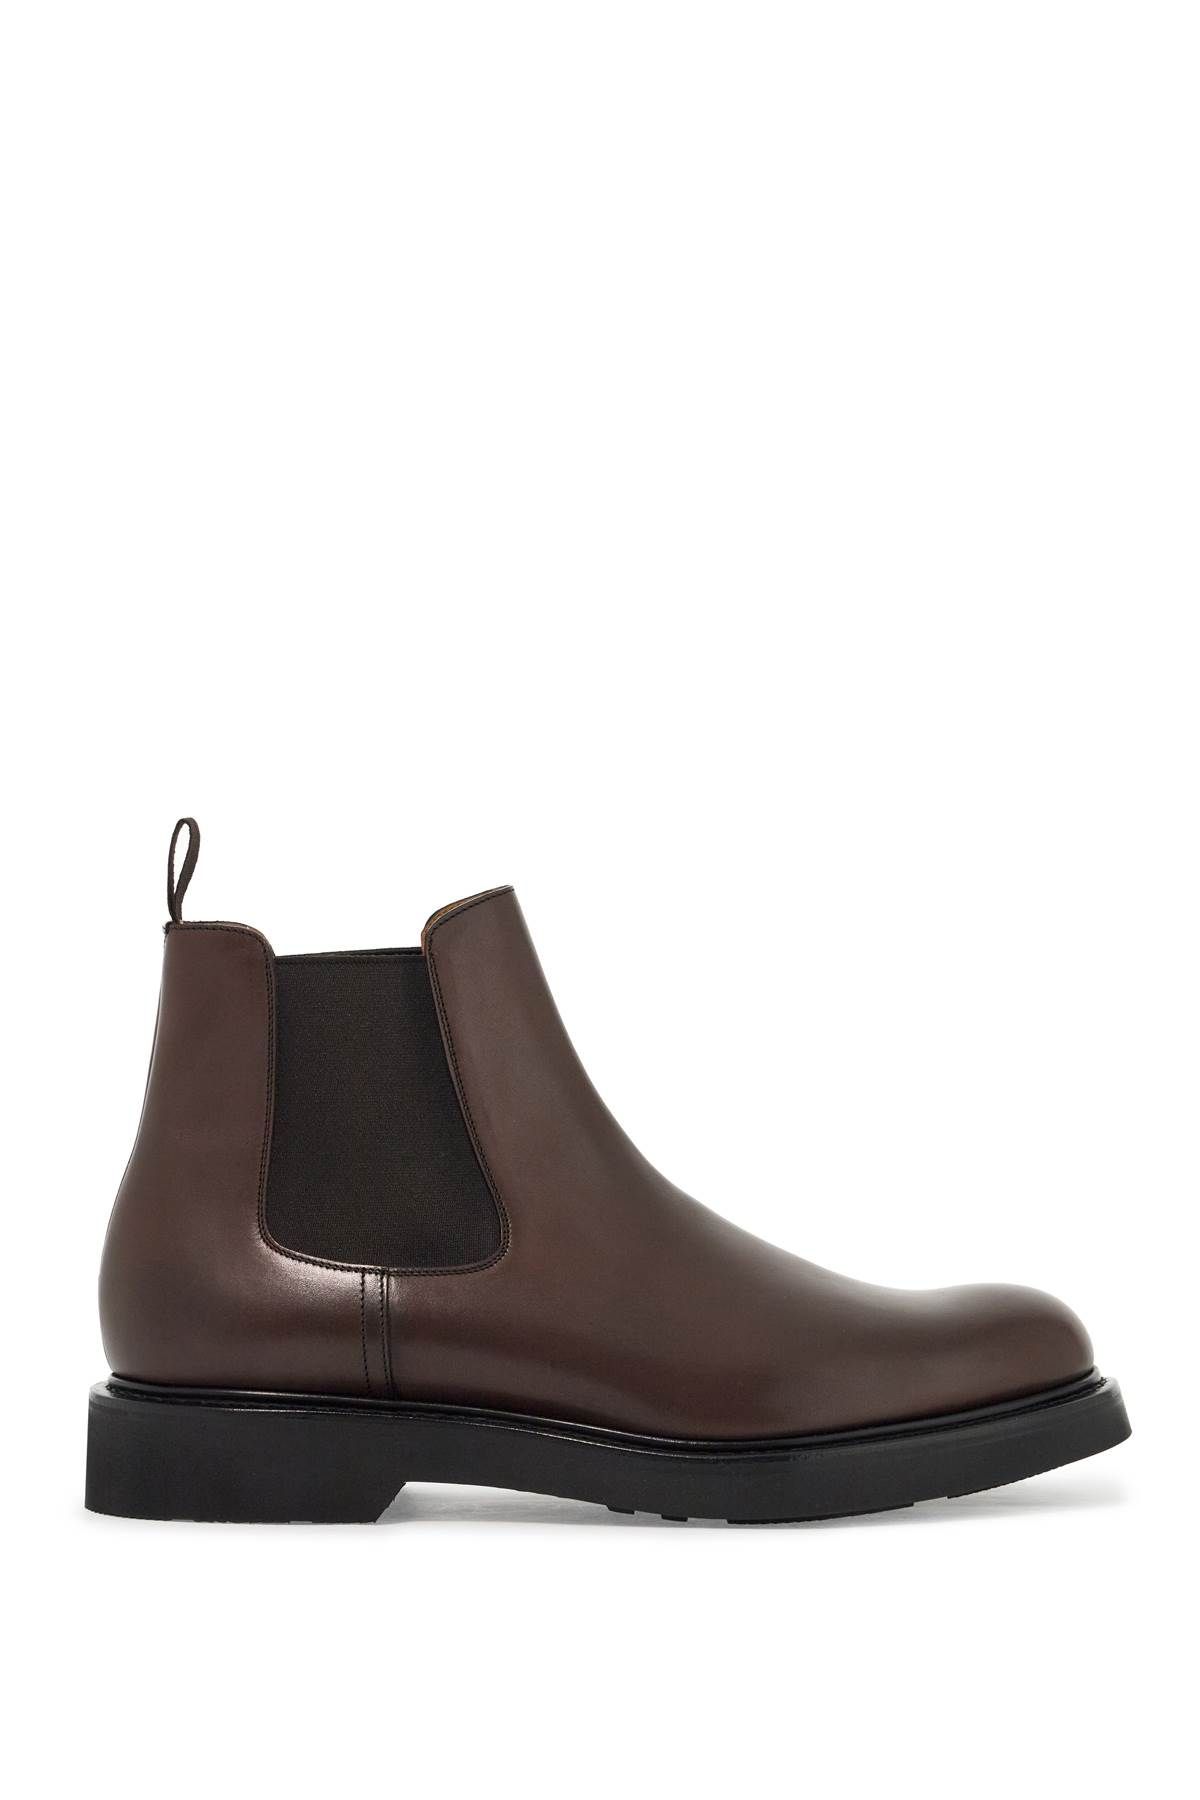 Church's CHURCH'S leather leicester chelsea boots